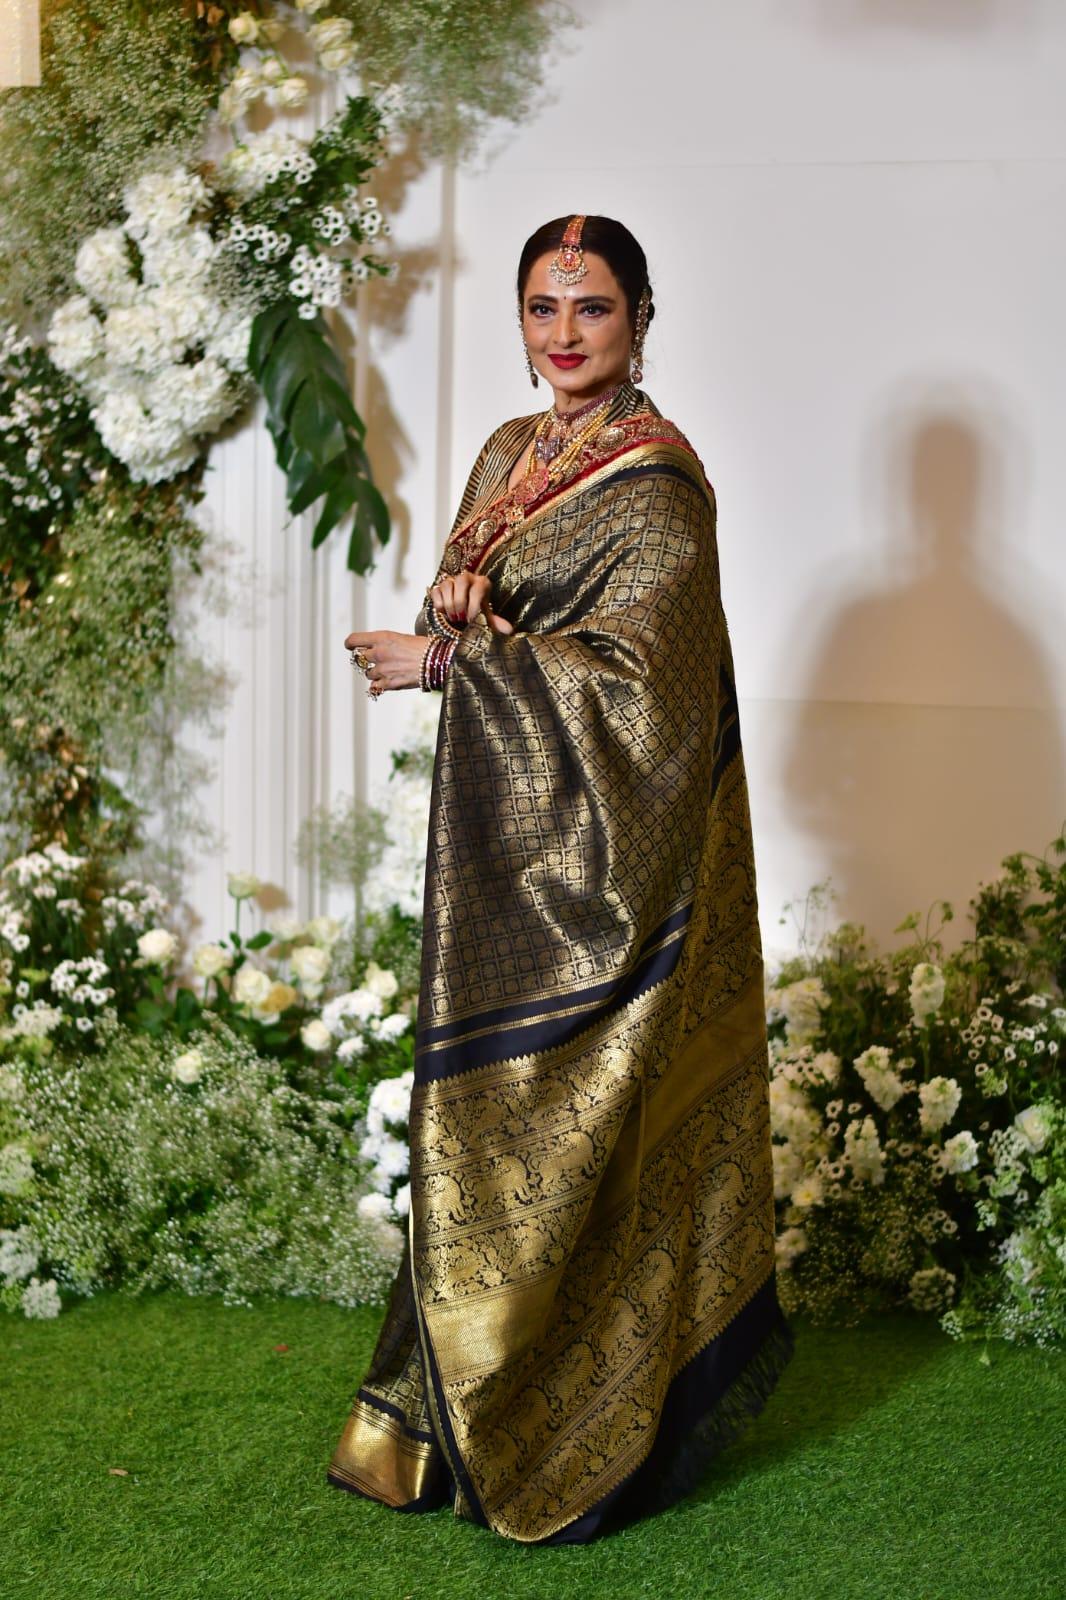 Veteran actress Rekha was among those who graced the occasion. In her classic Rekha style saree and intricate jewellery, Rekha stole the spotlight